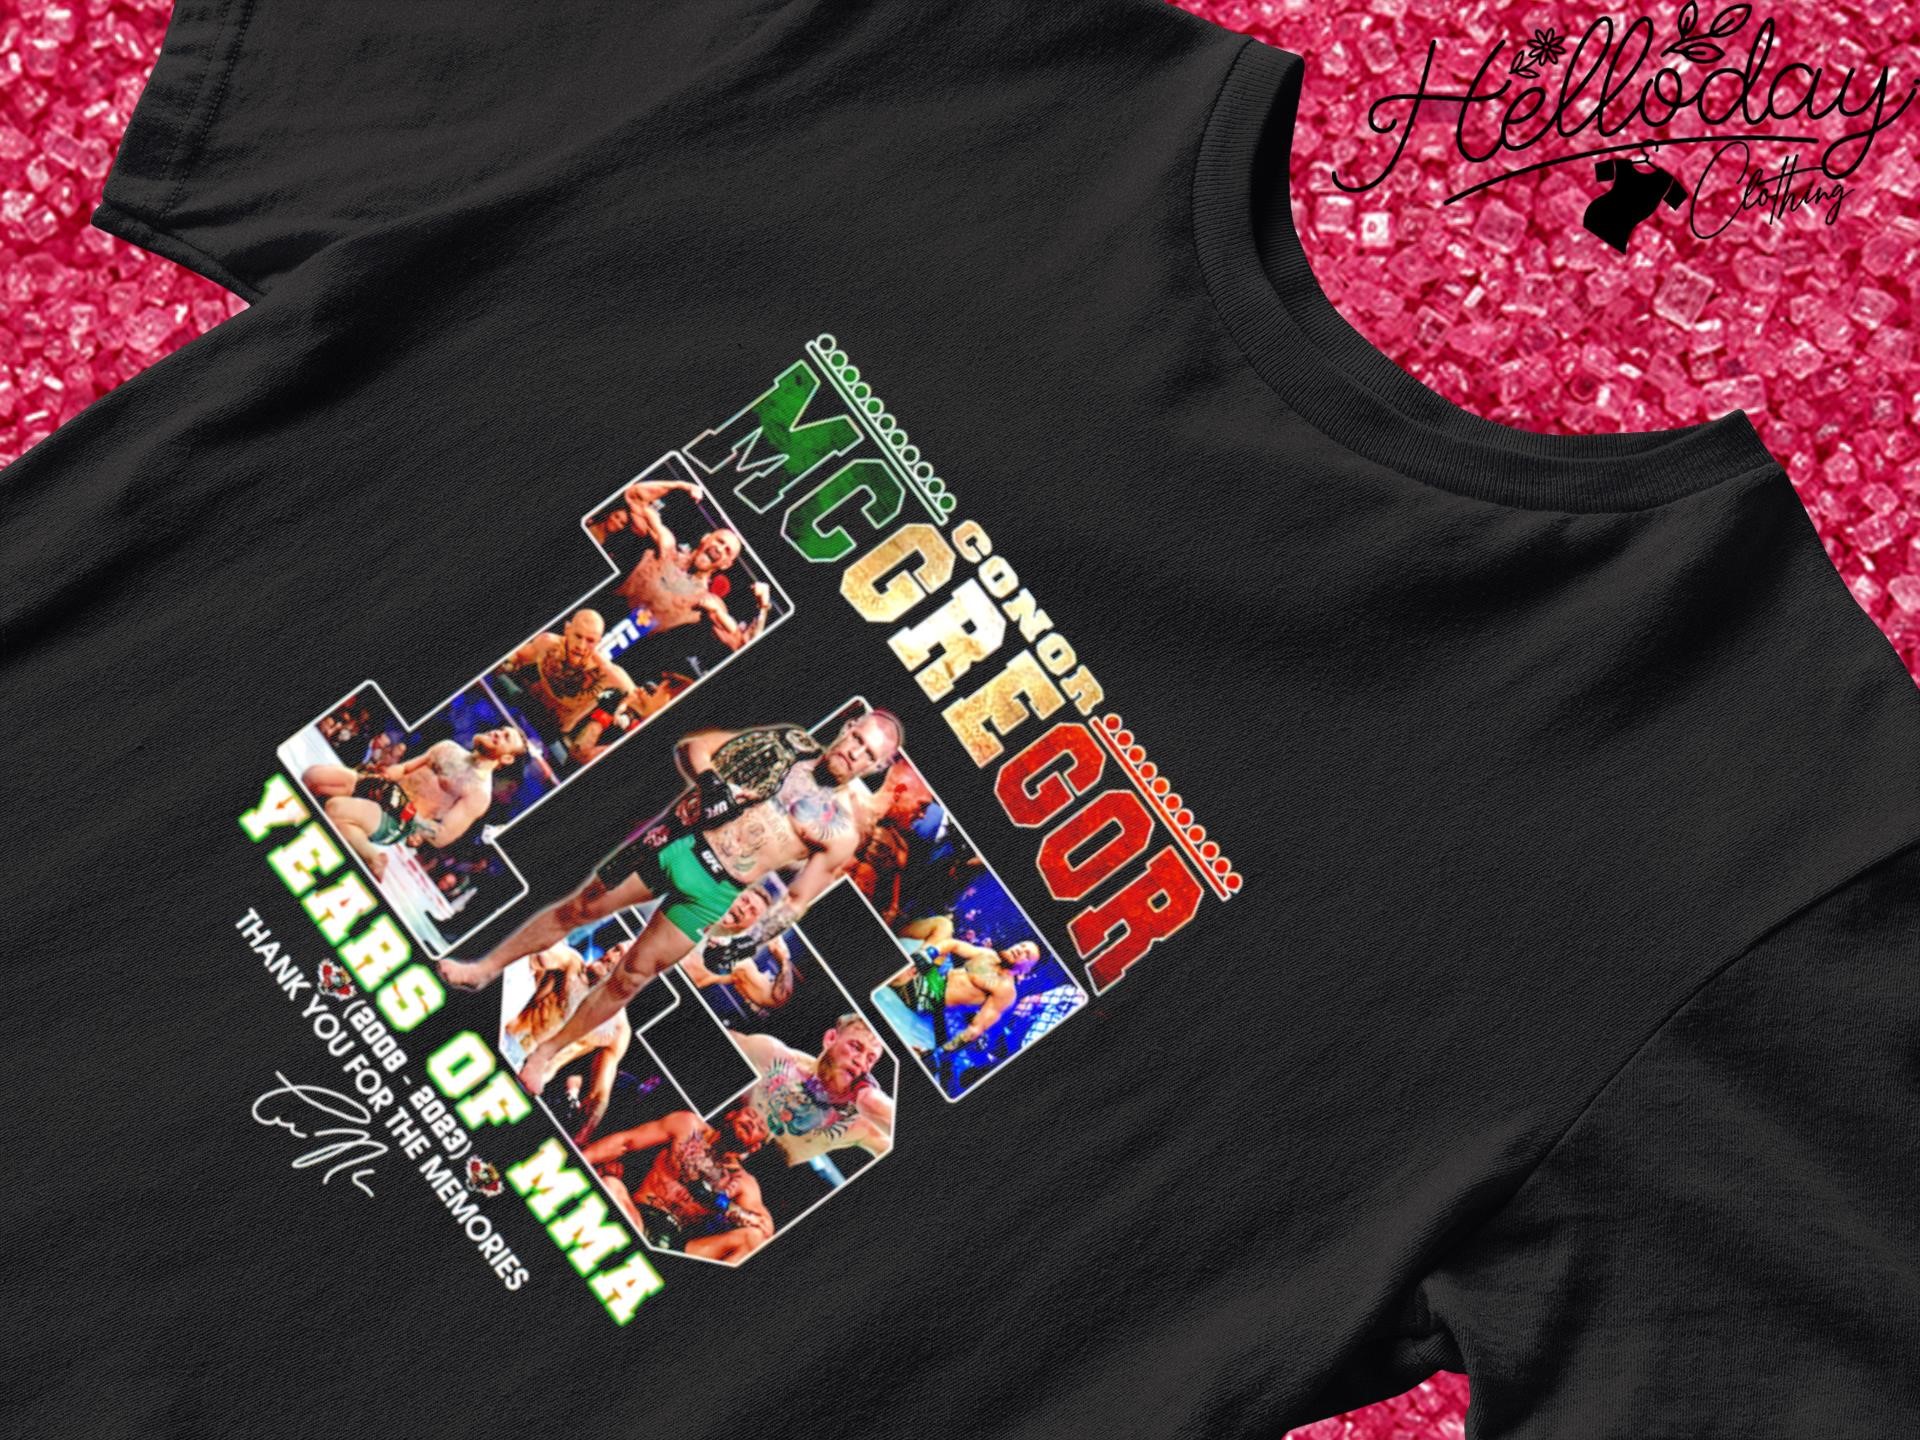 Conor Mcgregor 15 years of MMA 2008-2023 thank you for the memories signature shirt